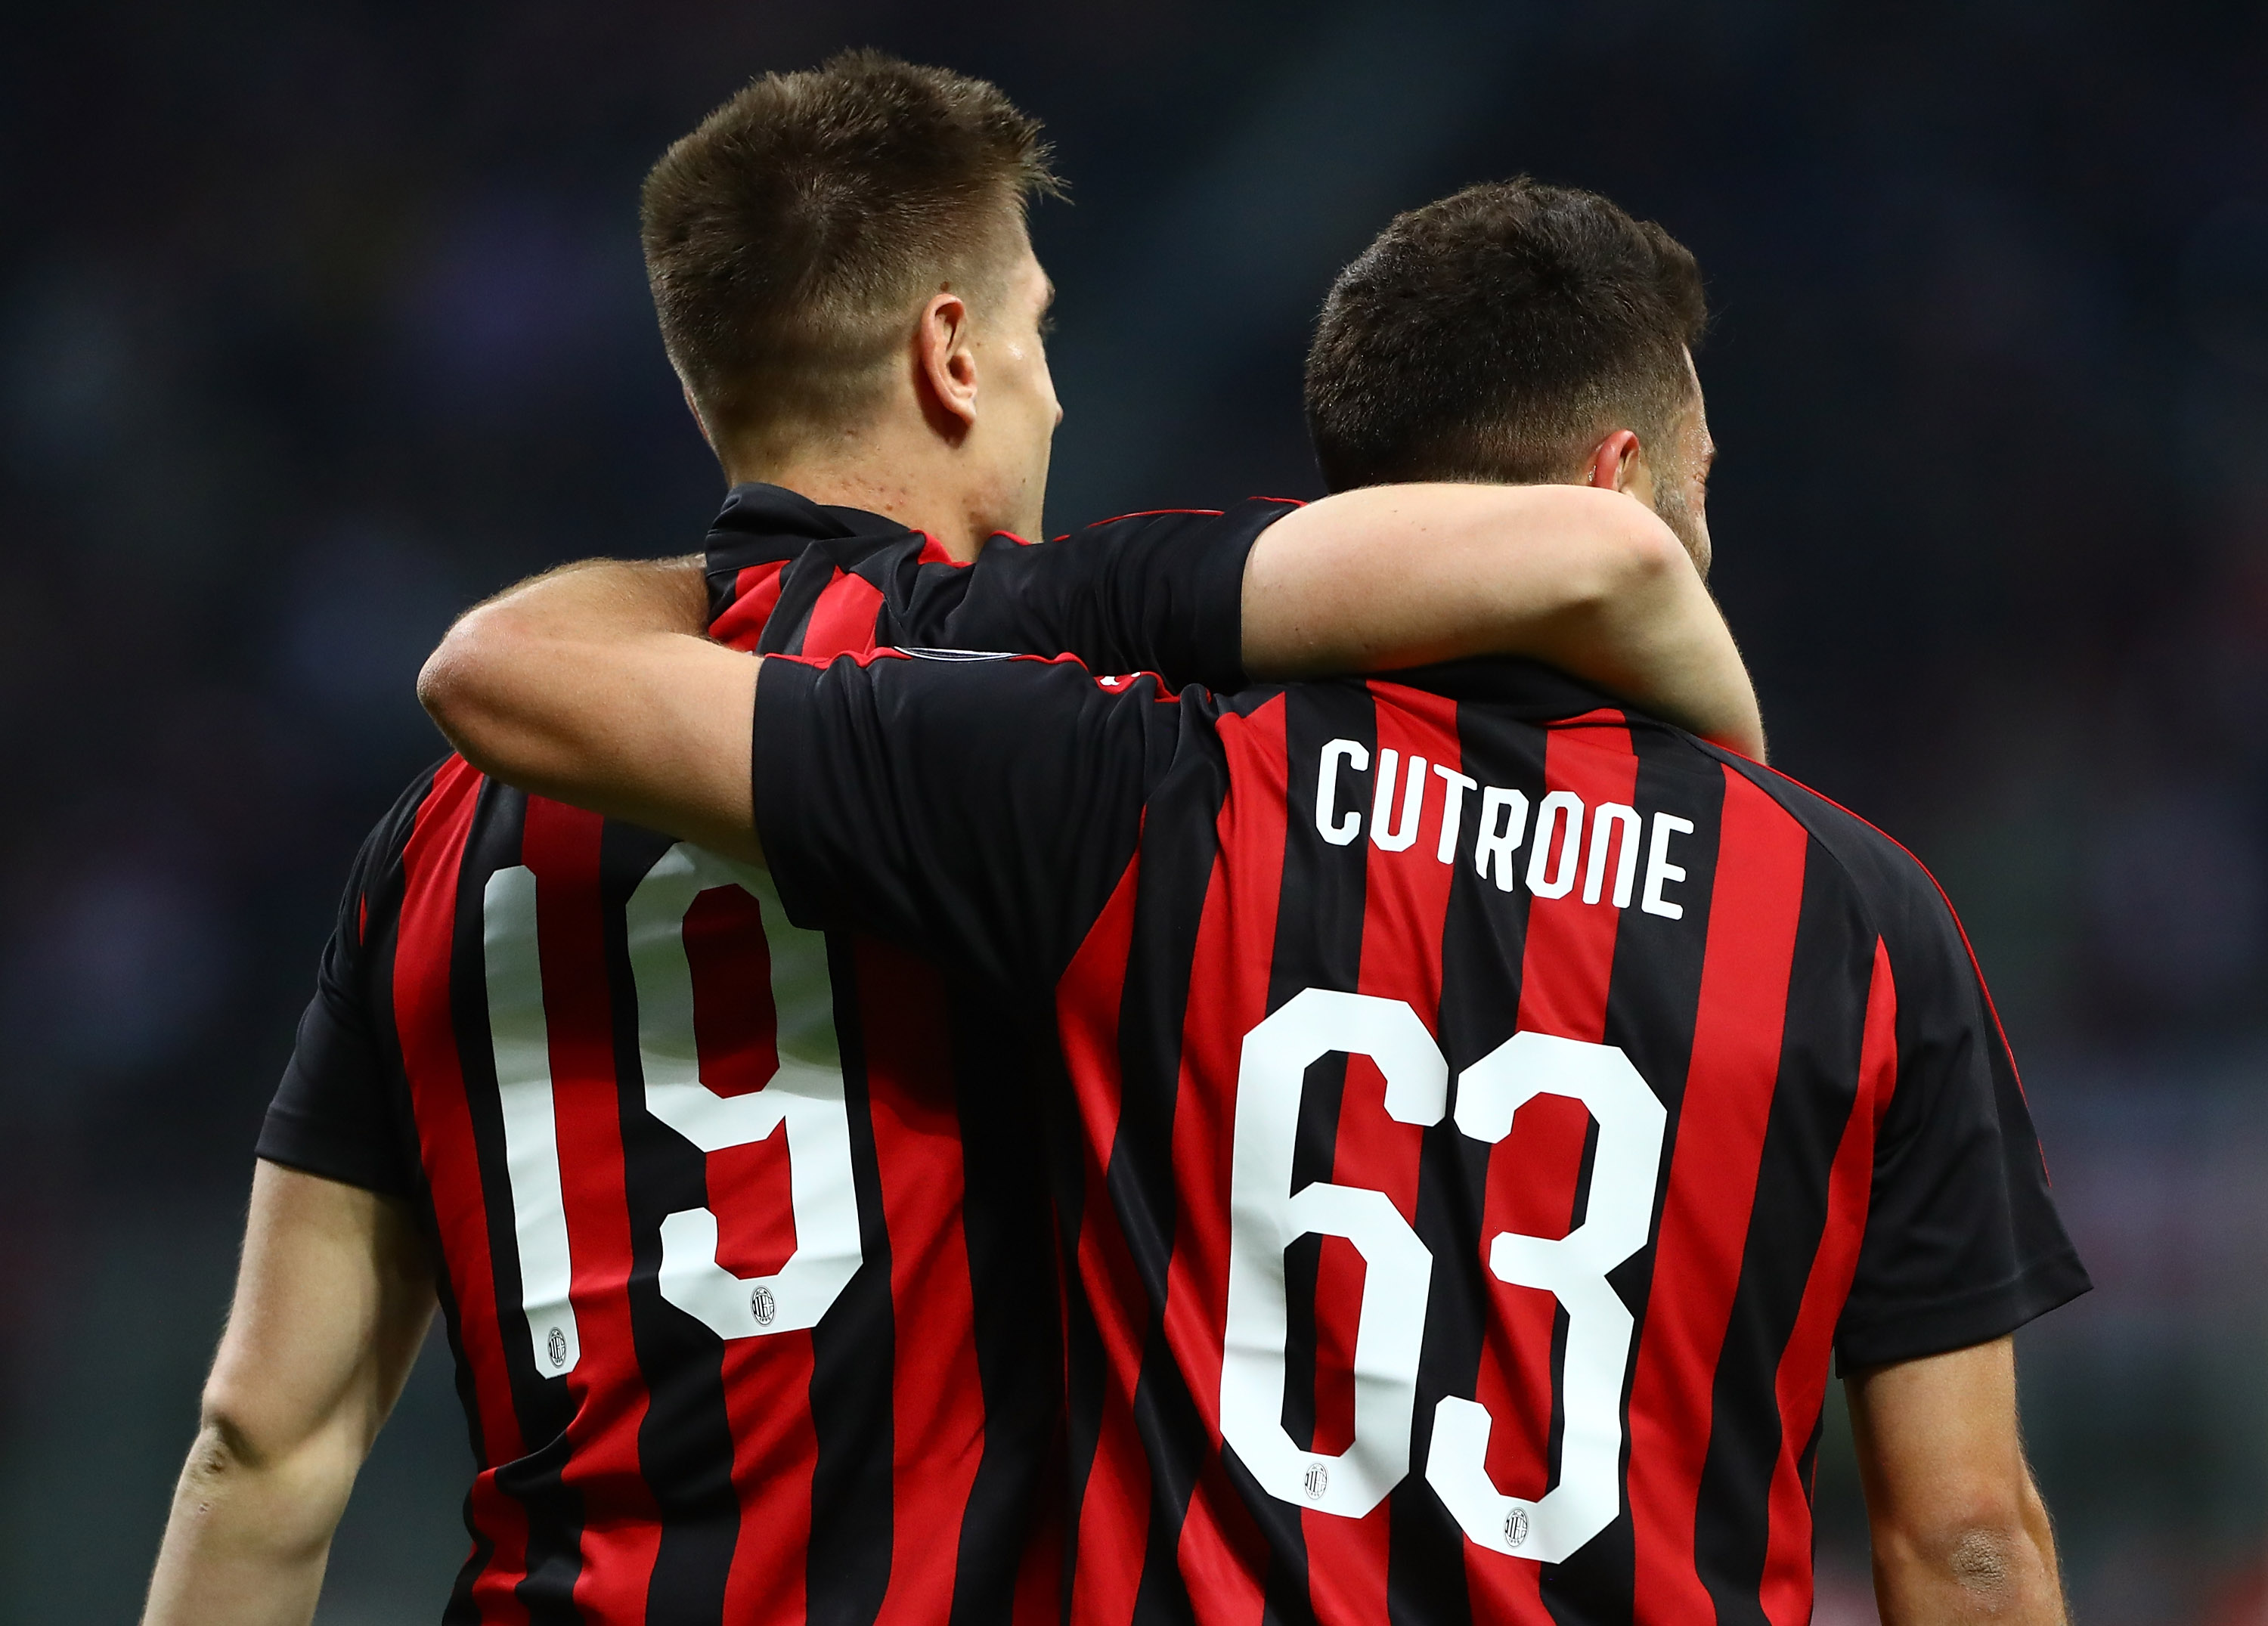 MILAN, ITALY - APRIL 02: Krzysztof Piatek (L) of AC Milan celebrates with his team-mate Patrick Cutrone (R) after scoring the opening goal during the Serie A match between AC Milan and Udinese at Stadio Giuseppe Meazza on April 2, 2019 in Milan, Italy. (Photo by Marco Luzzani/Getty Images)